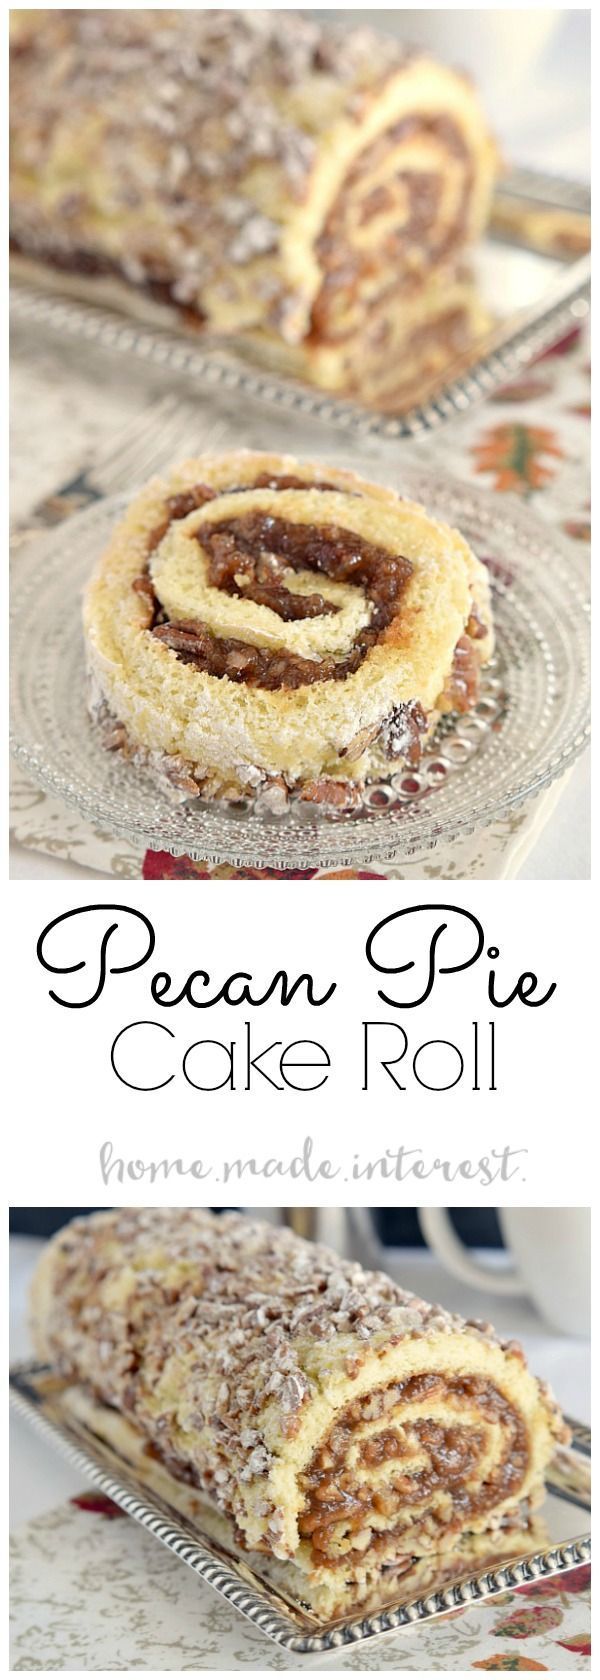 Pecan pie filling rolled into a light sponge cake make this pecan pie cake roll a